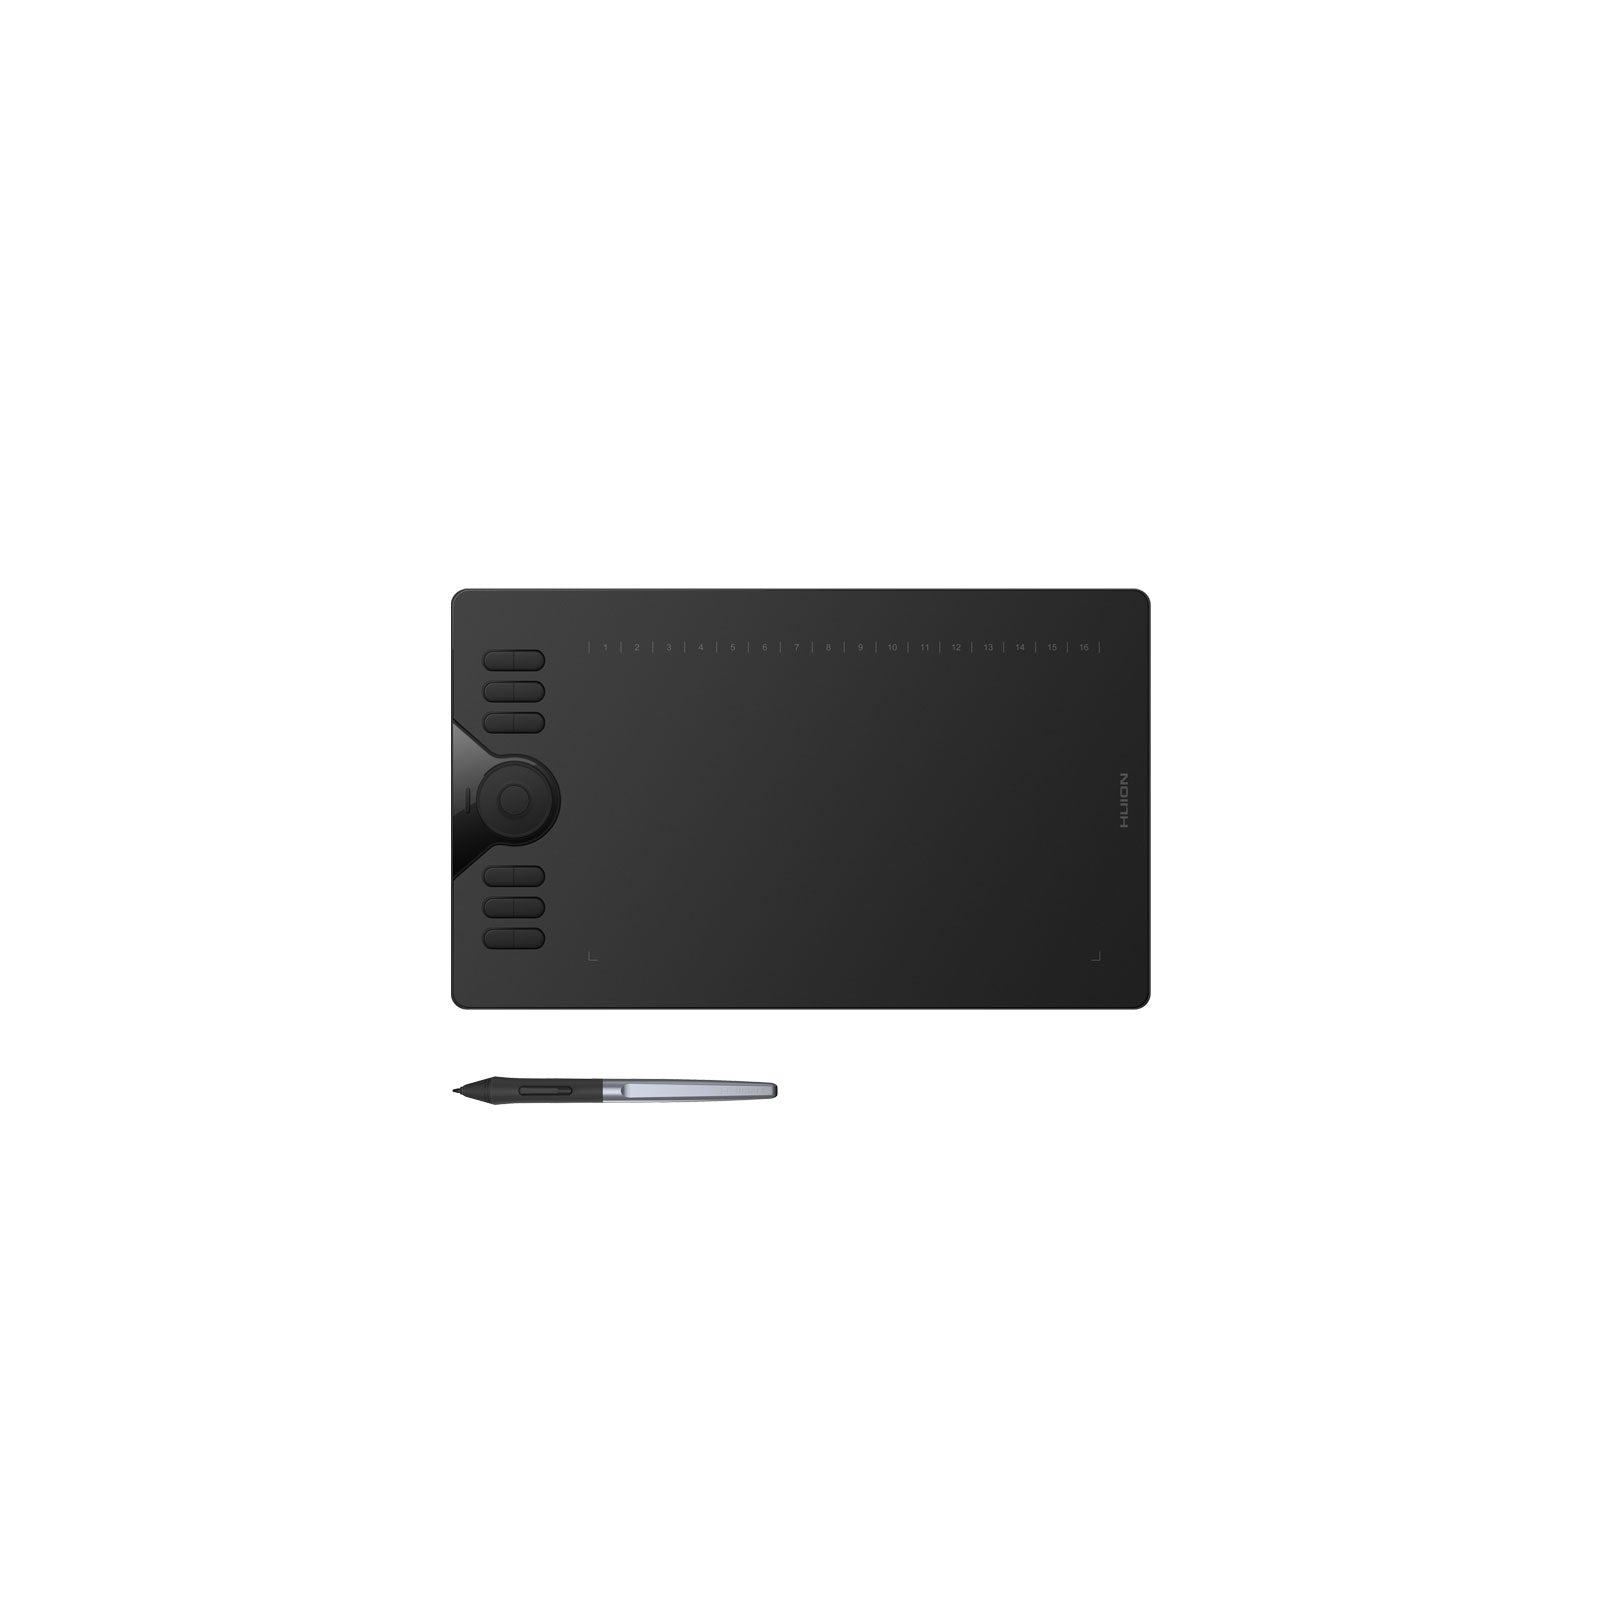 Huion Keydial mini K20 Wireless Bluetooth Controller for Creators  Huion  Official Store: Drawing Tablets, Pen Tablets, Pen Display, Led Light Pad